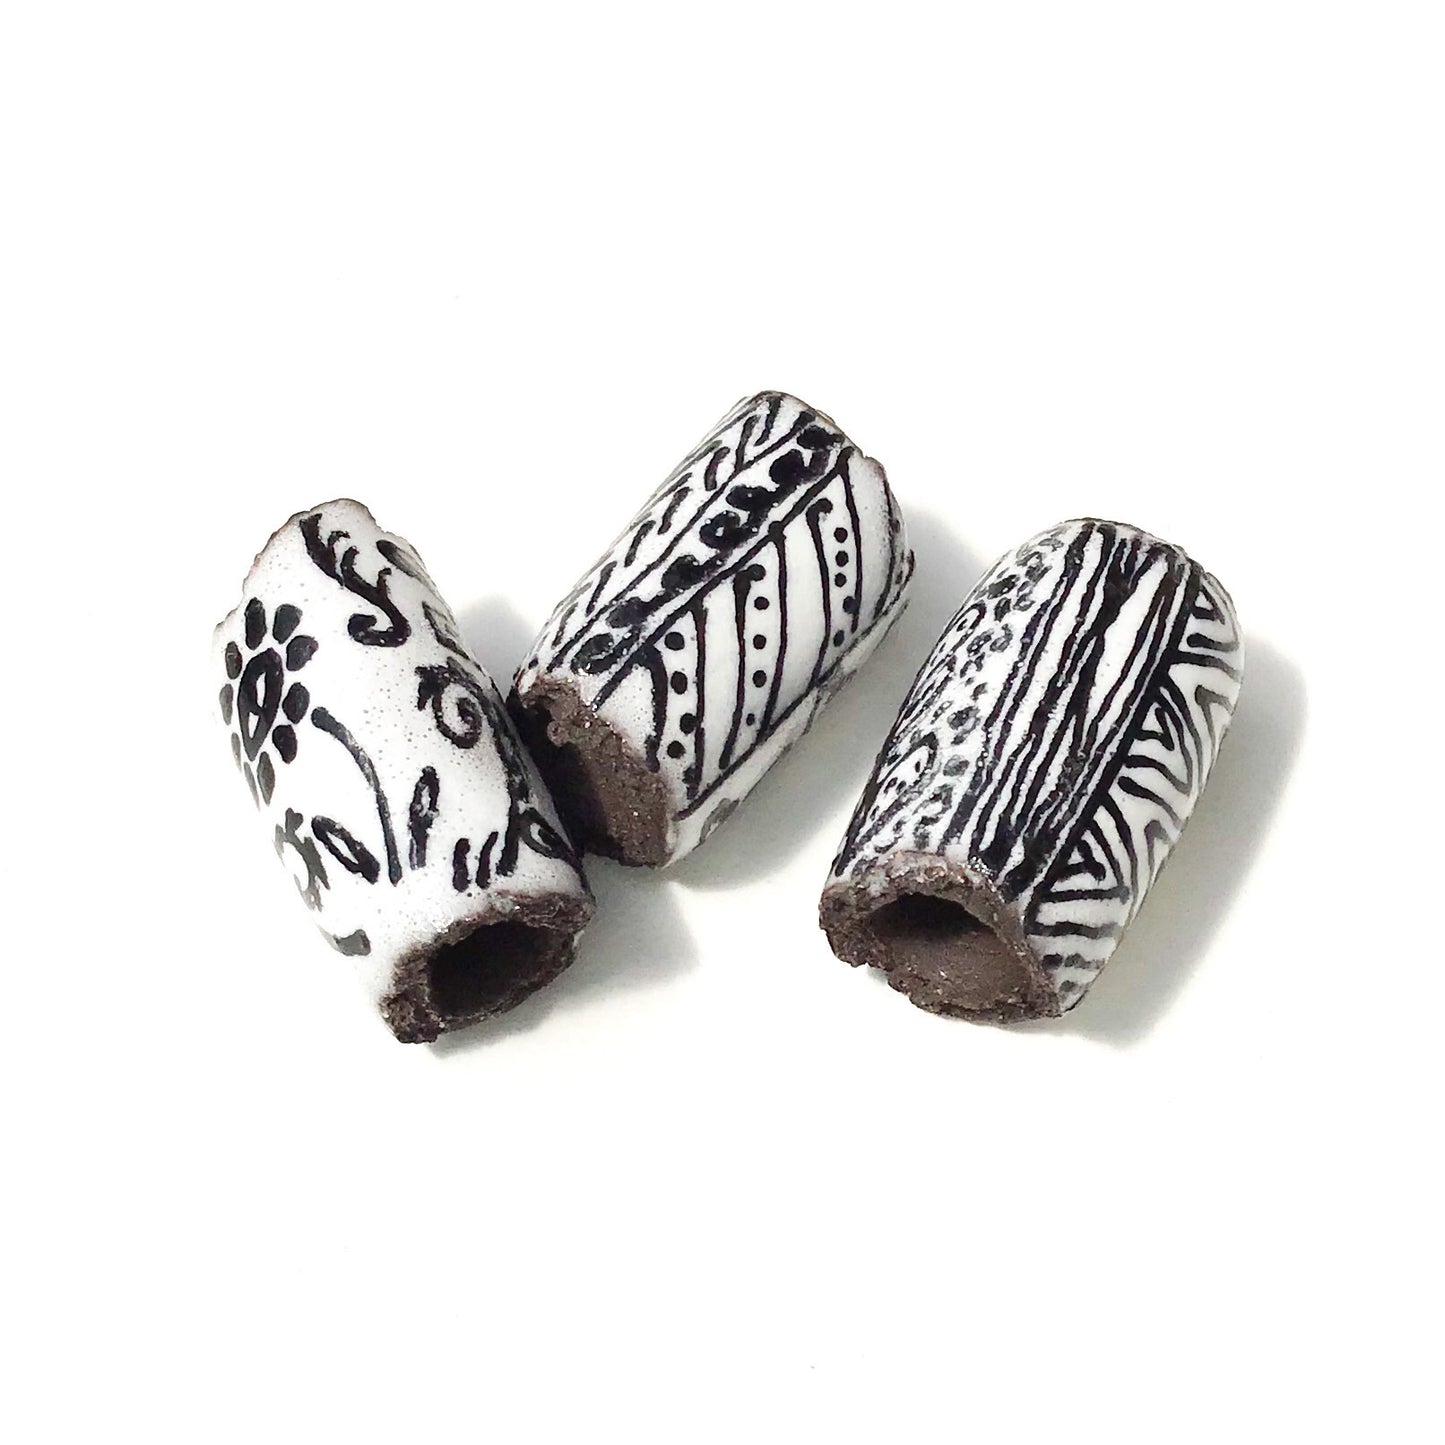 Black Clay Beads with Handpainted Detail - Black and White Beads - Set of 3